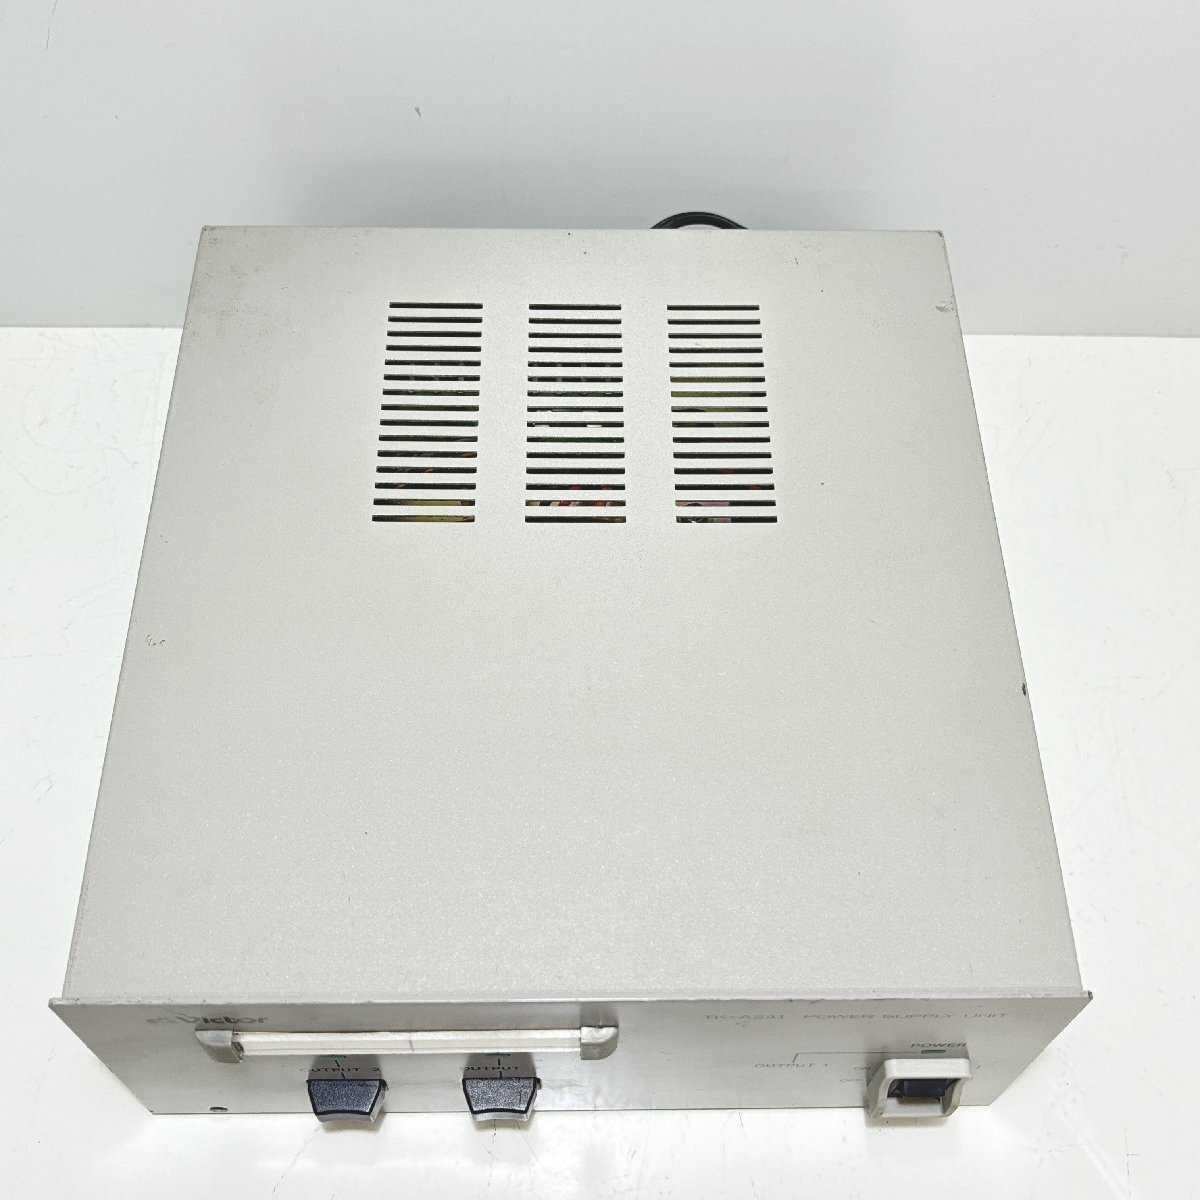 Victor power supply unit TK-A241 Victor security camera 0306183